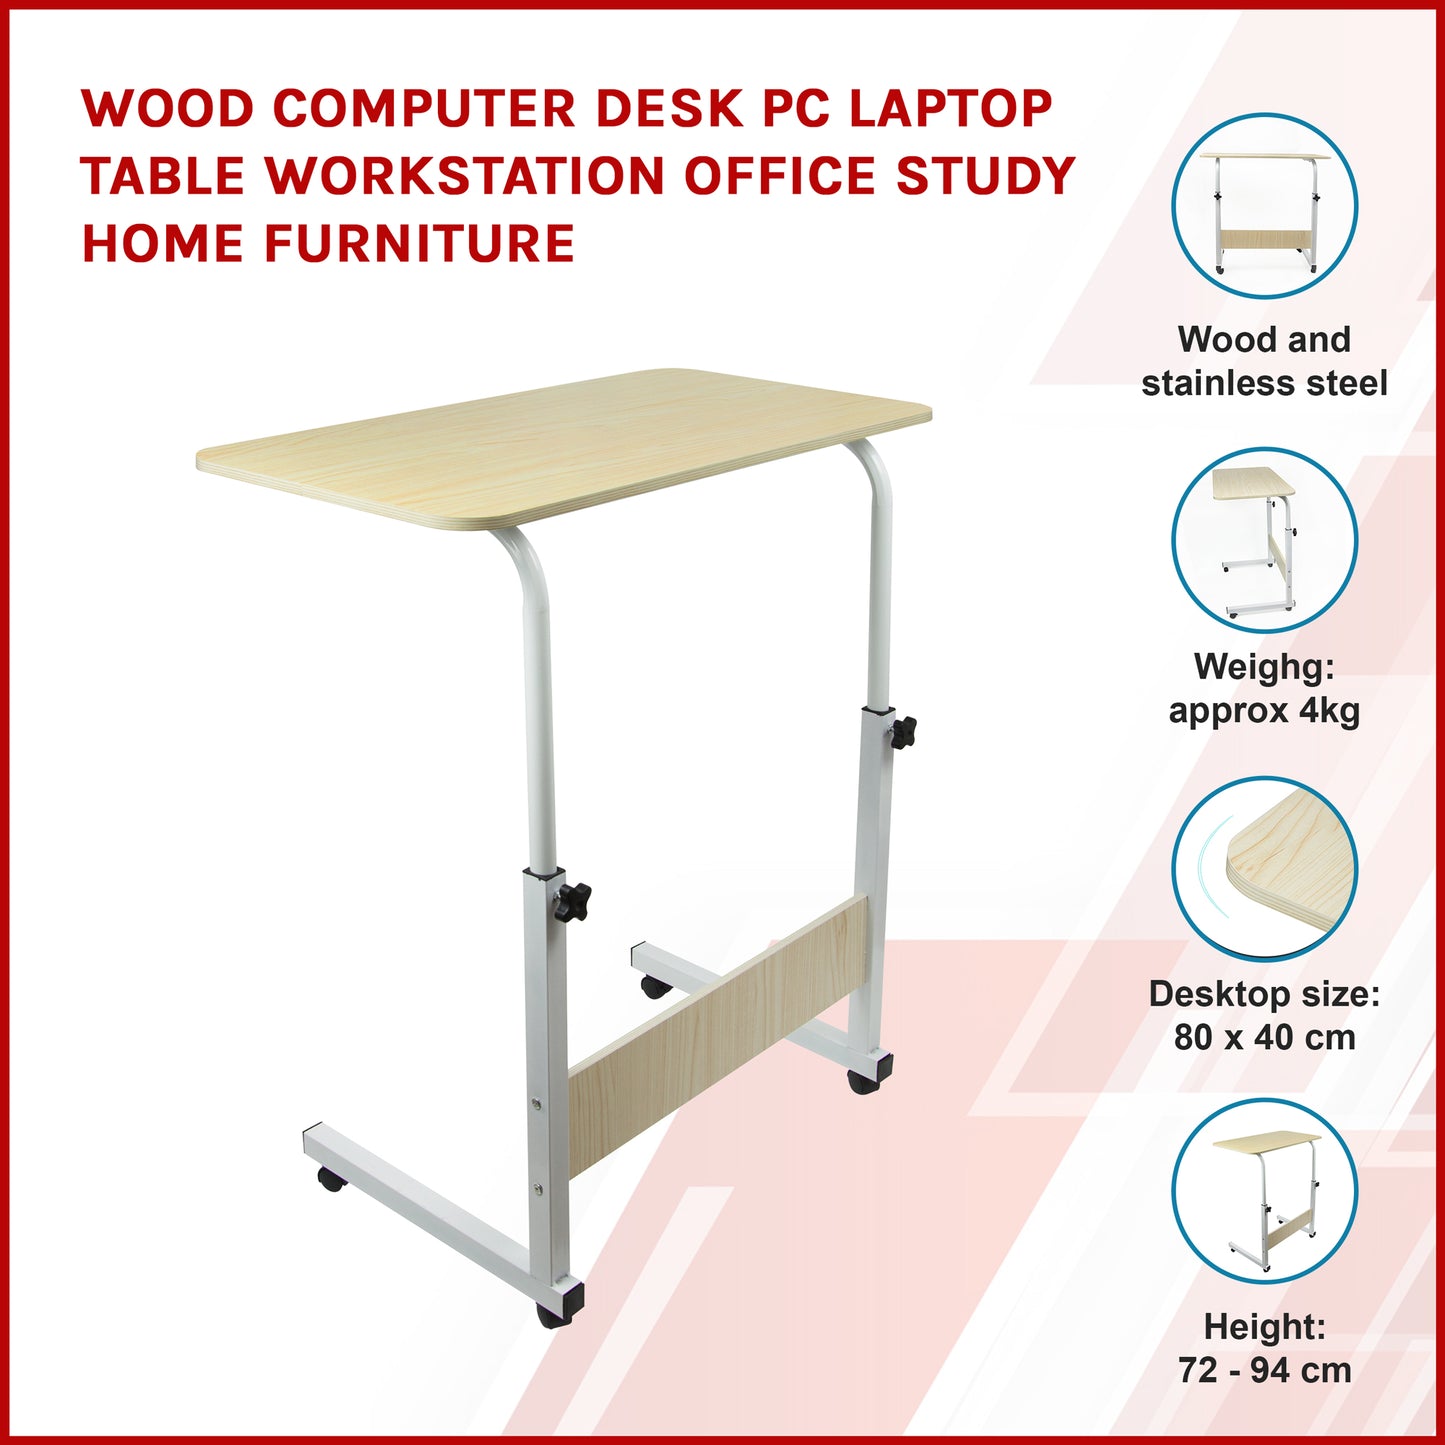 Wood Computer Desk PC Laptop Table Workstation Office Study Home Furniture - image3